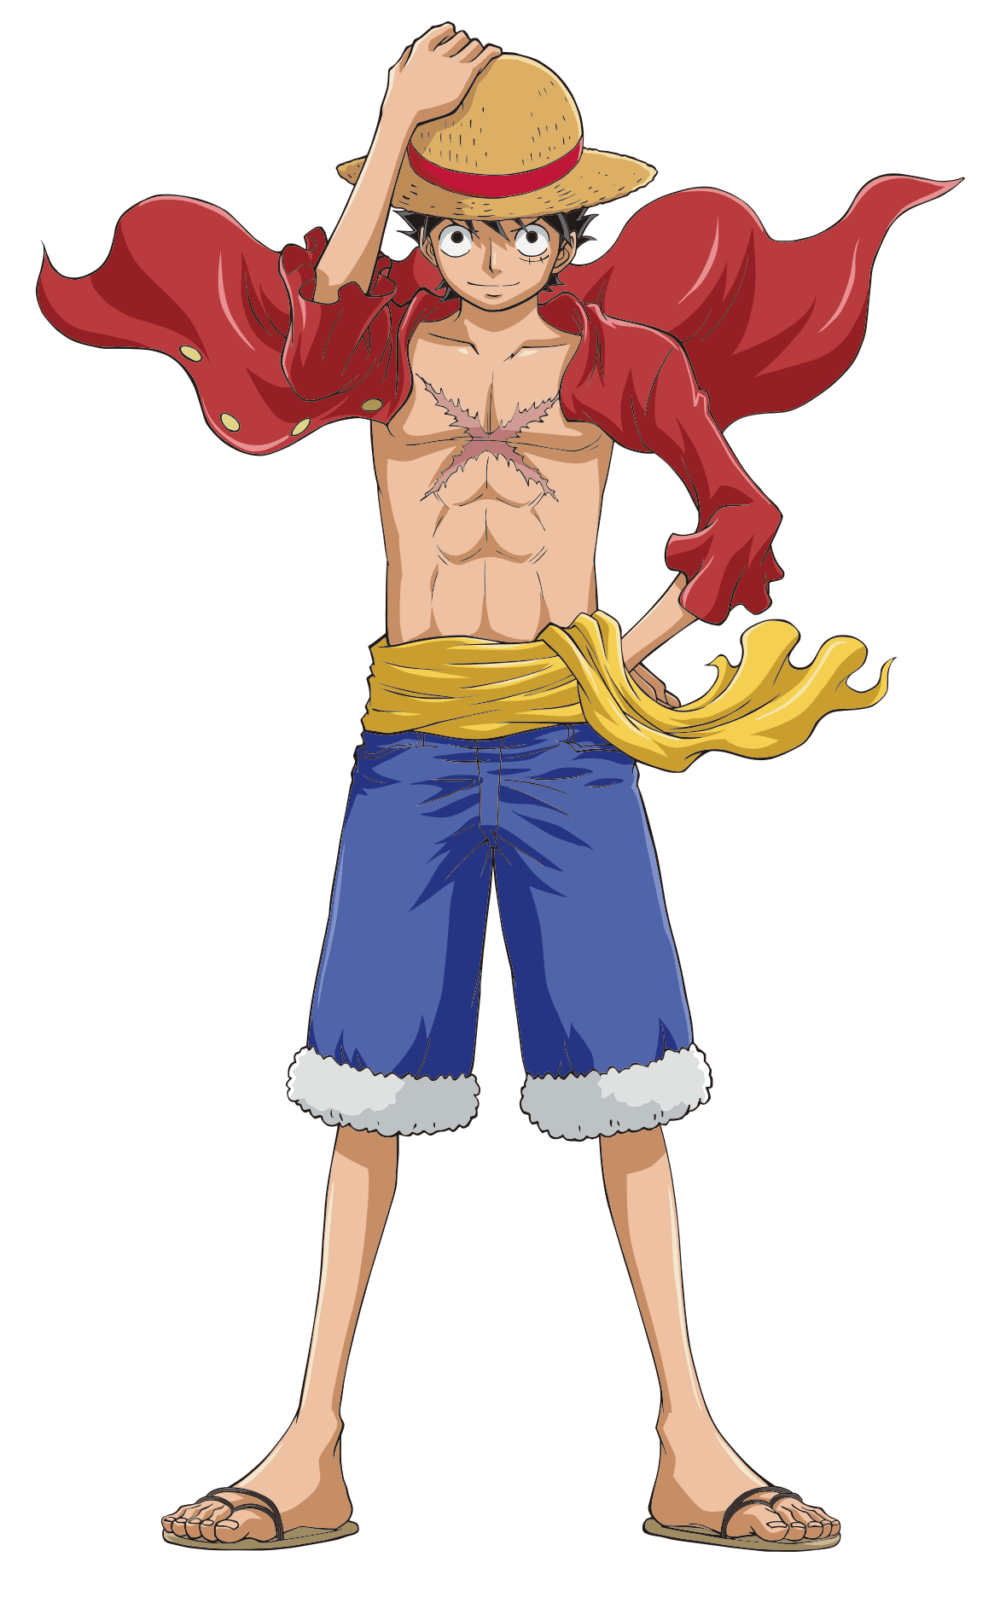 One Piece Anime - Cool Monkey D. Luffy 3D Sticker - $9.99 - The Mad Shop-demhanvico.com.vn